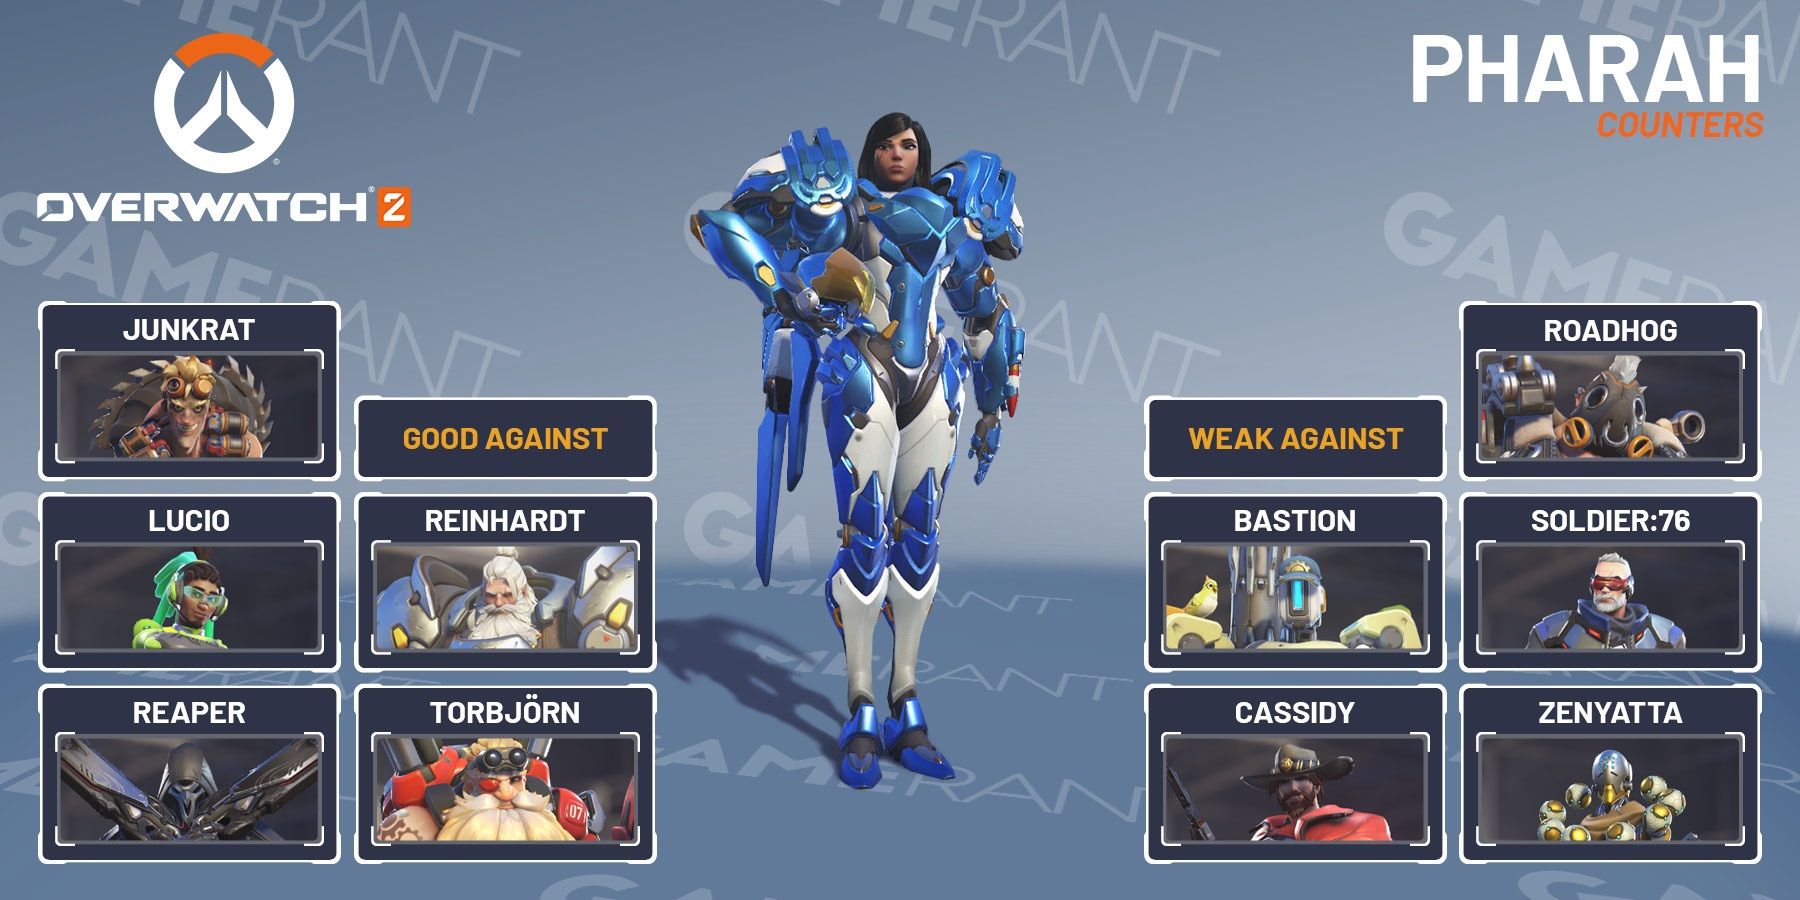 Overwatch 2 Pharah Strength And Weakness